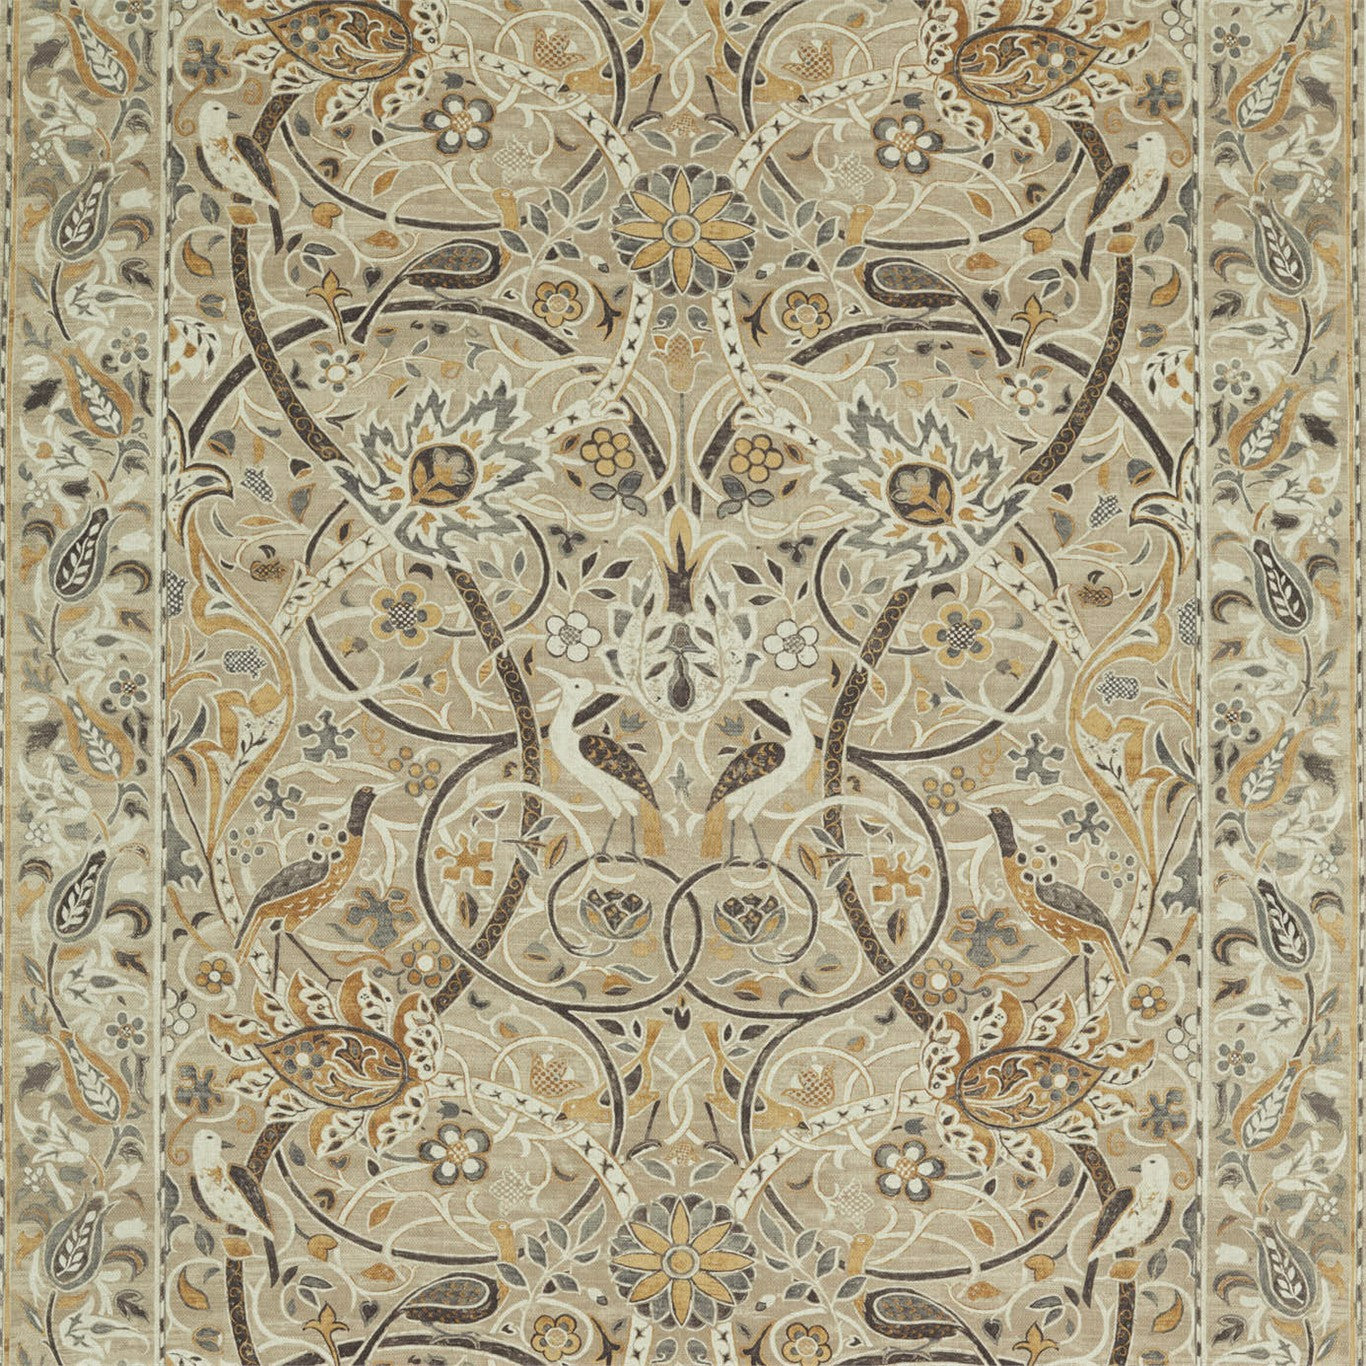 Bullerswood Fabric by Morris & Co. - DMA4226394 - Stone/Mustard